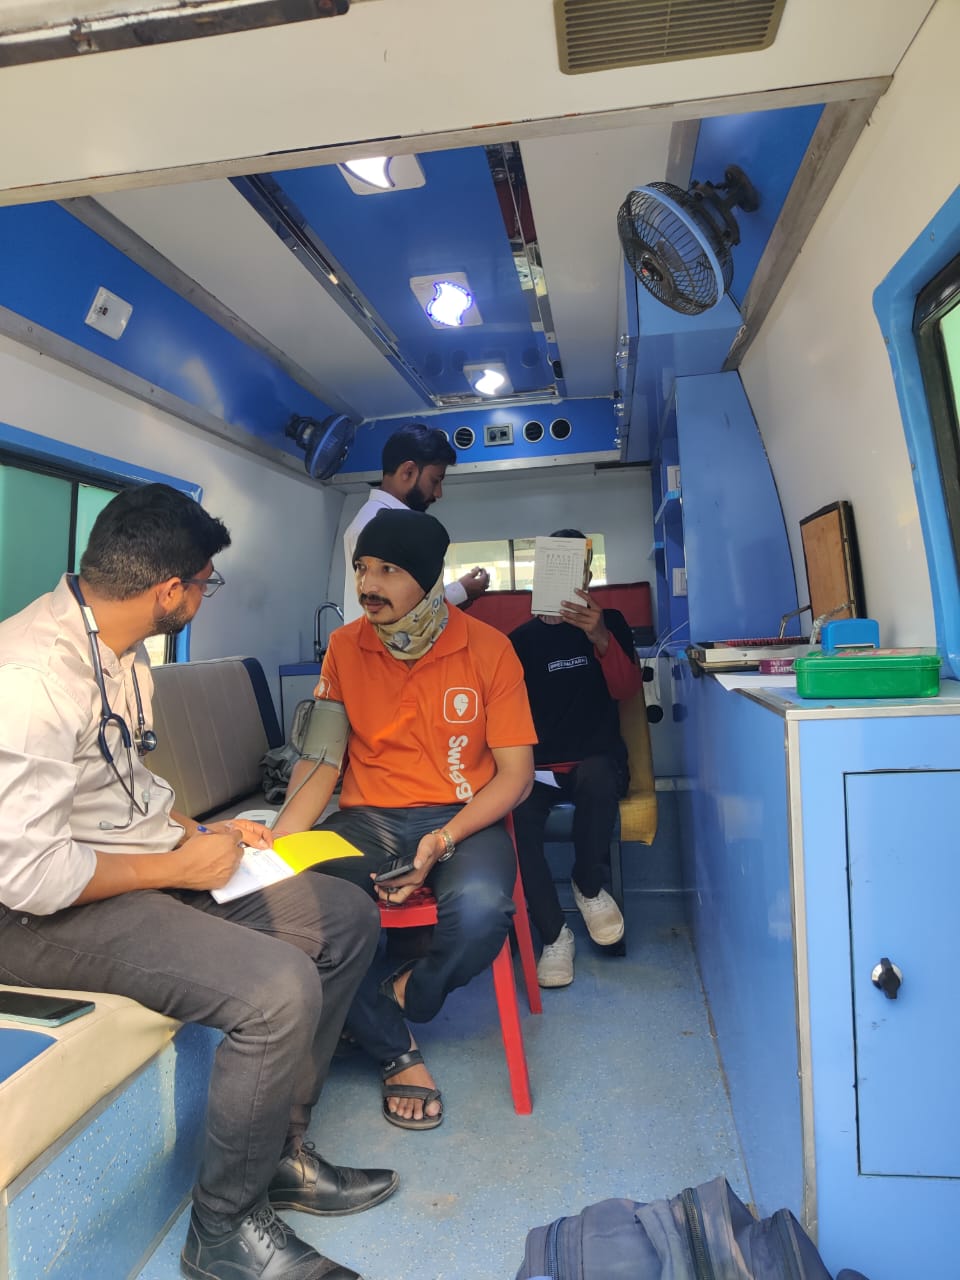 Swiggy Launches Mobile Medical Units and Teleconsultation for Delivery Partners